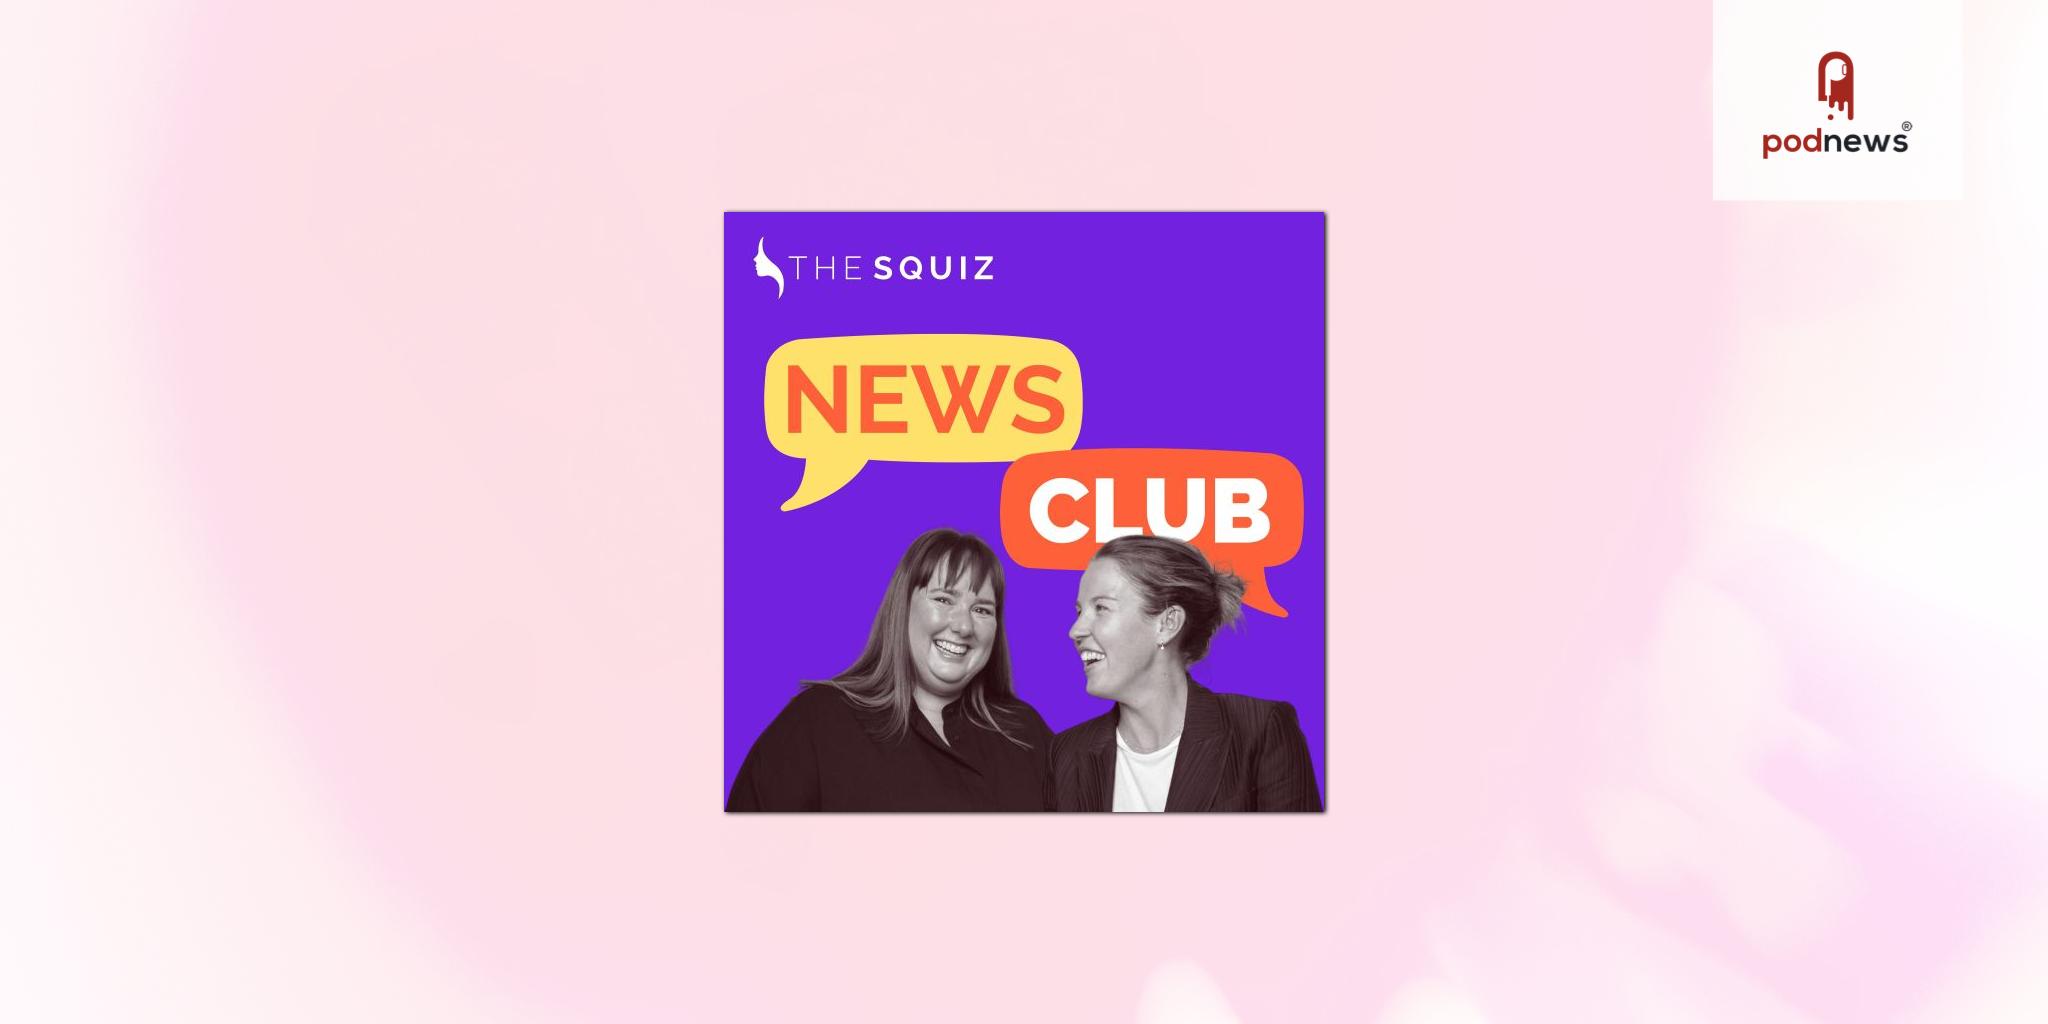 Introducing News Club: The Squiz's Latest Venture in Australian Short-Form News Content